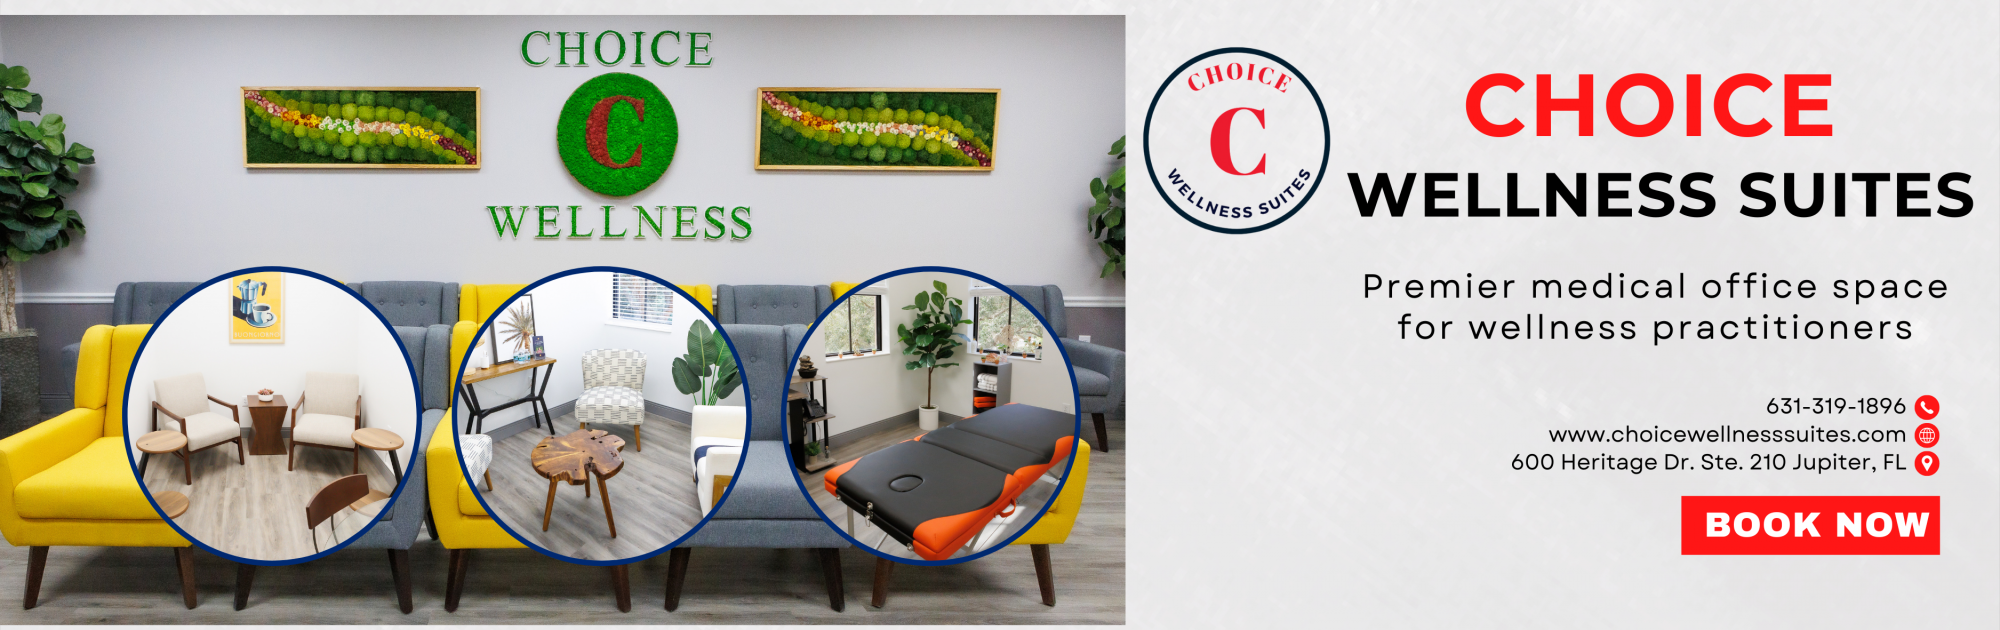 Choice Wellness Suites Banner